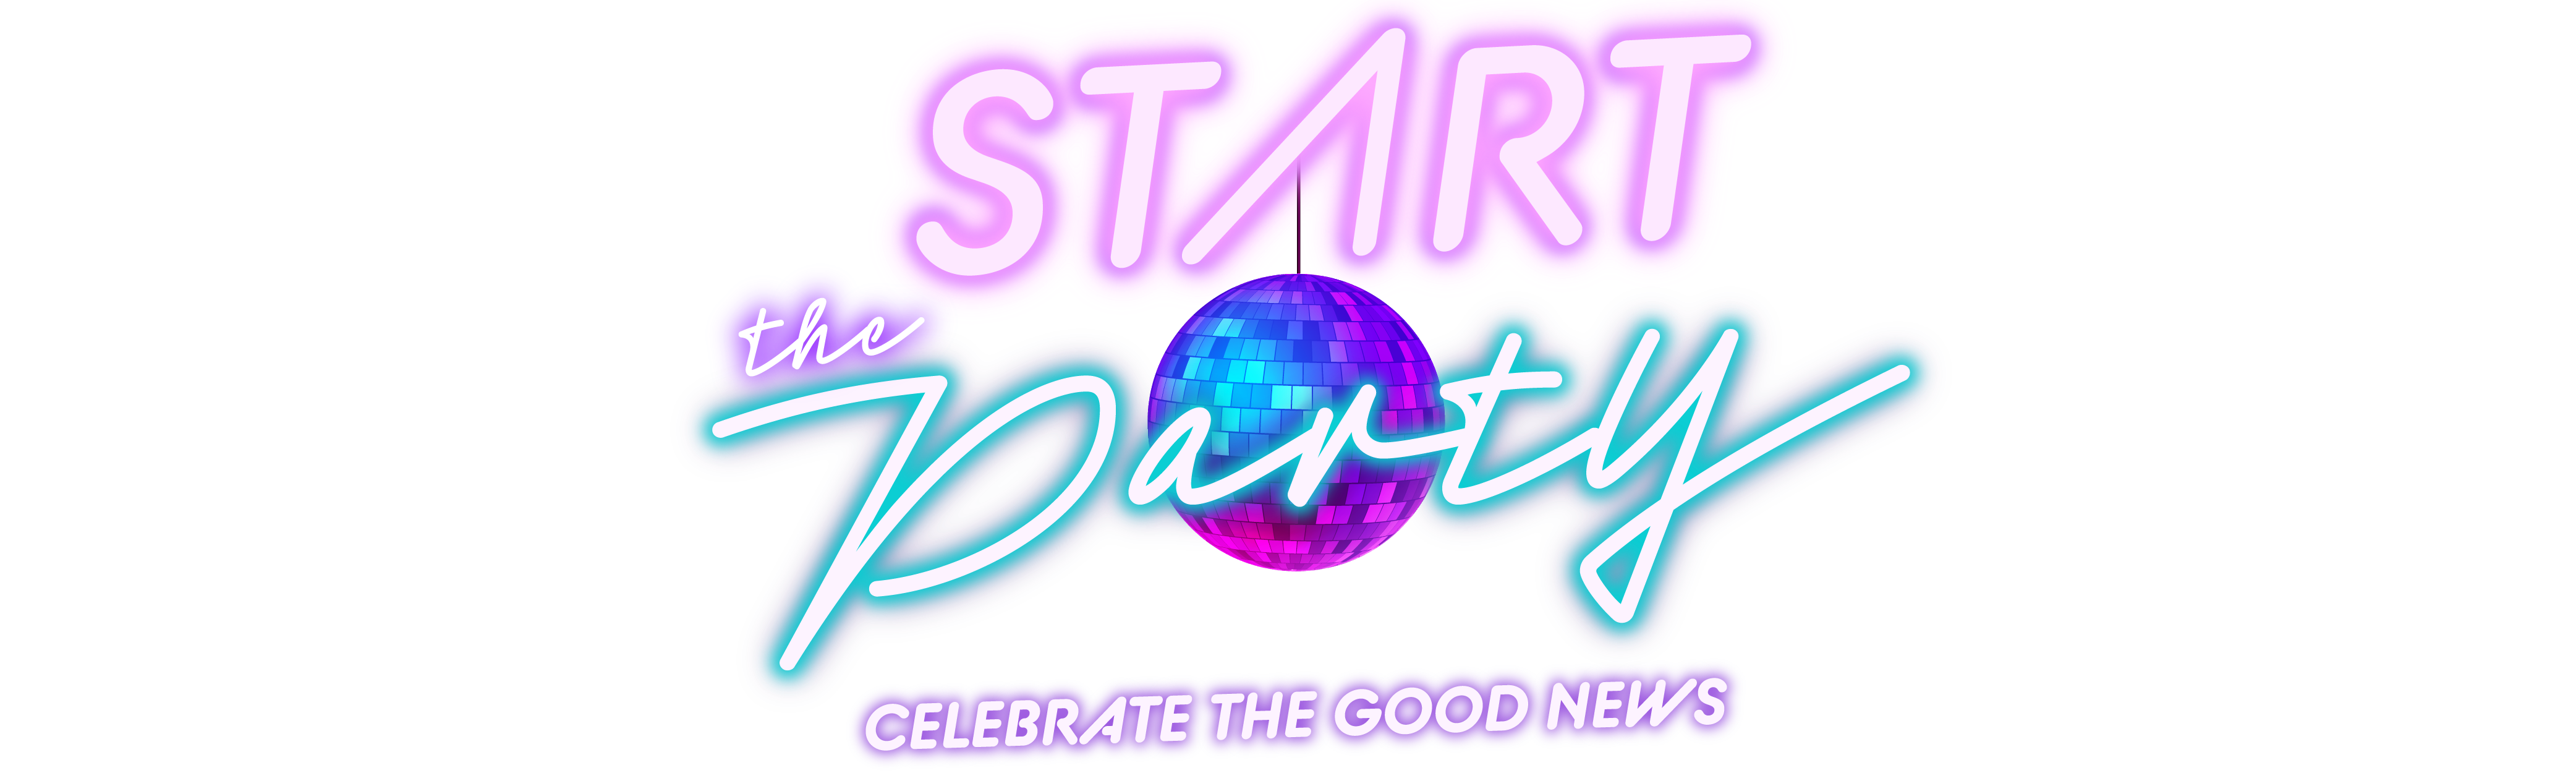 Image: Start the Party! Celebrate the Good News